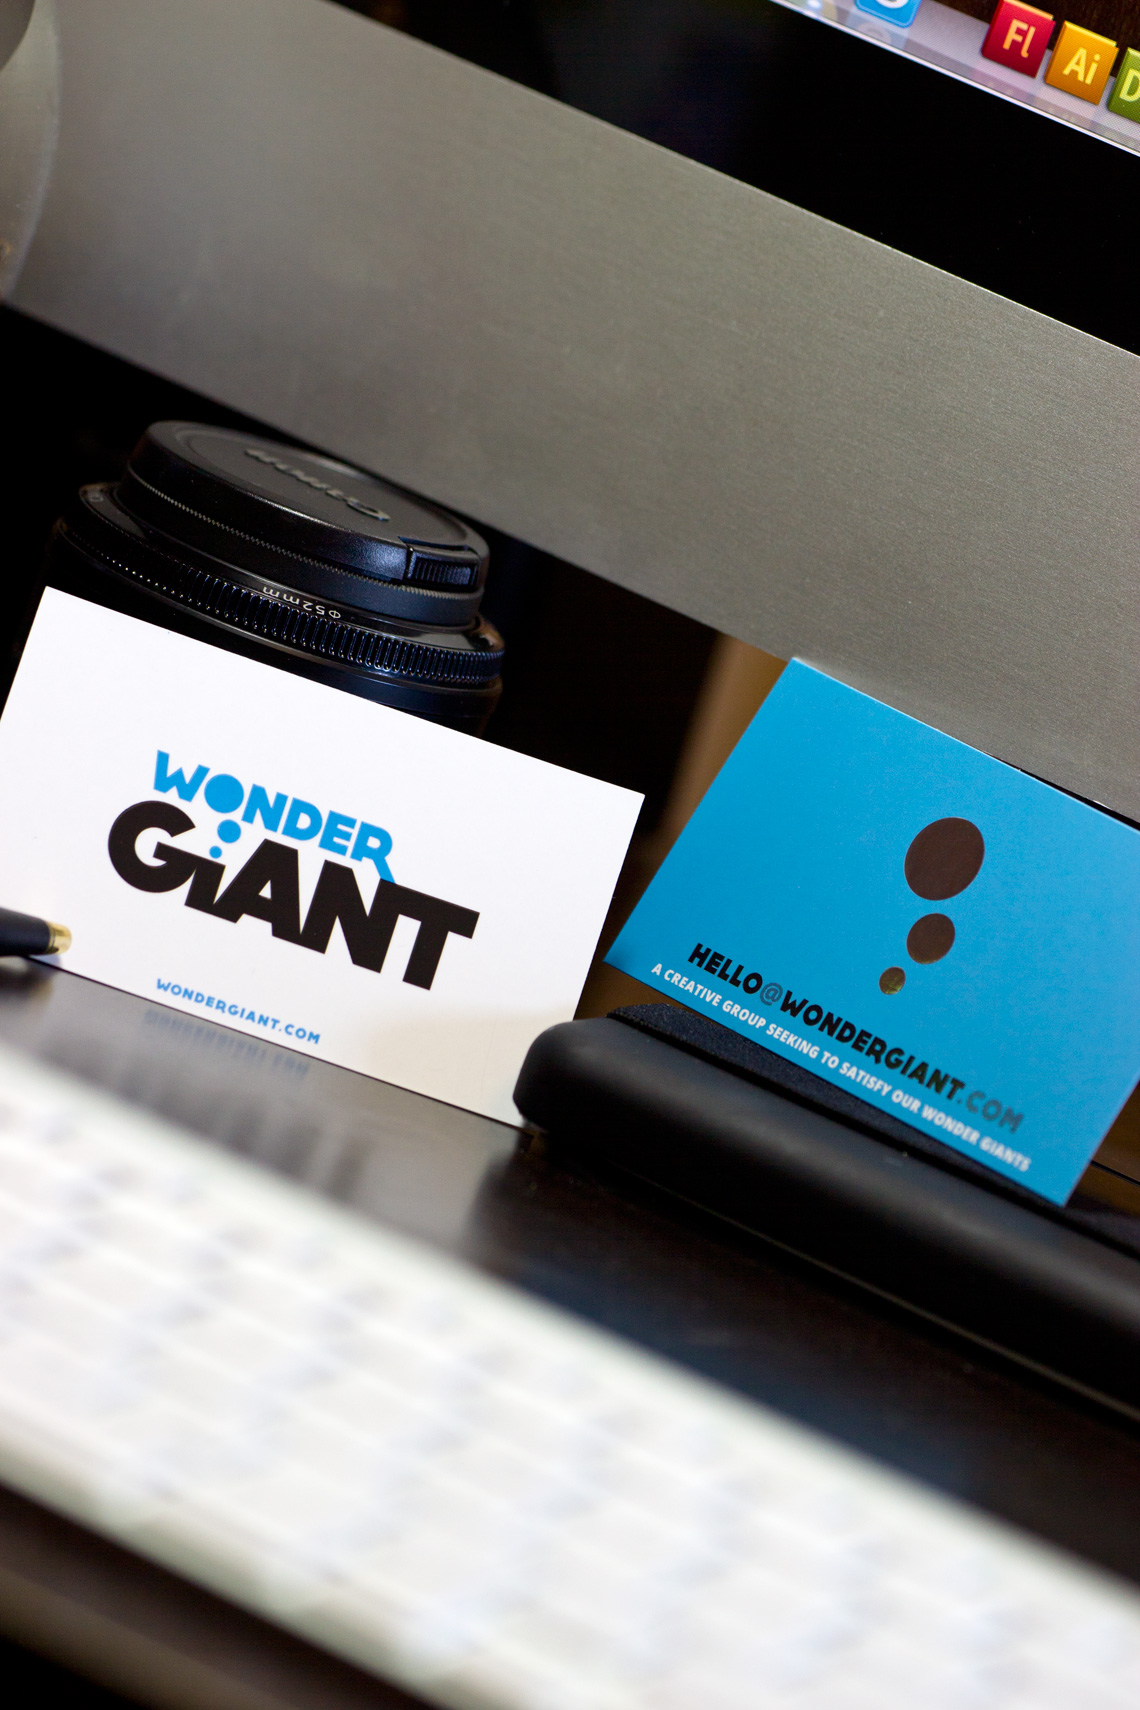 wonder giant business cards